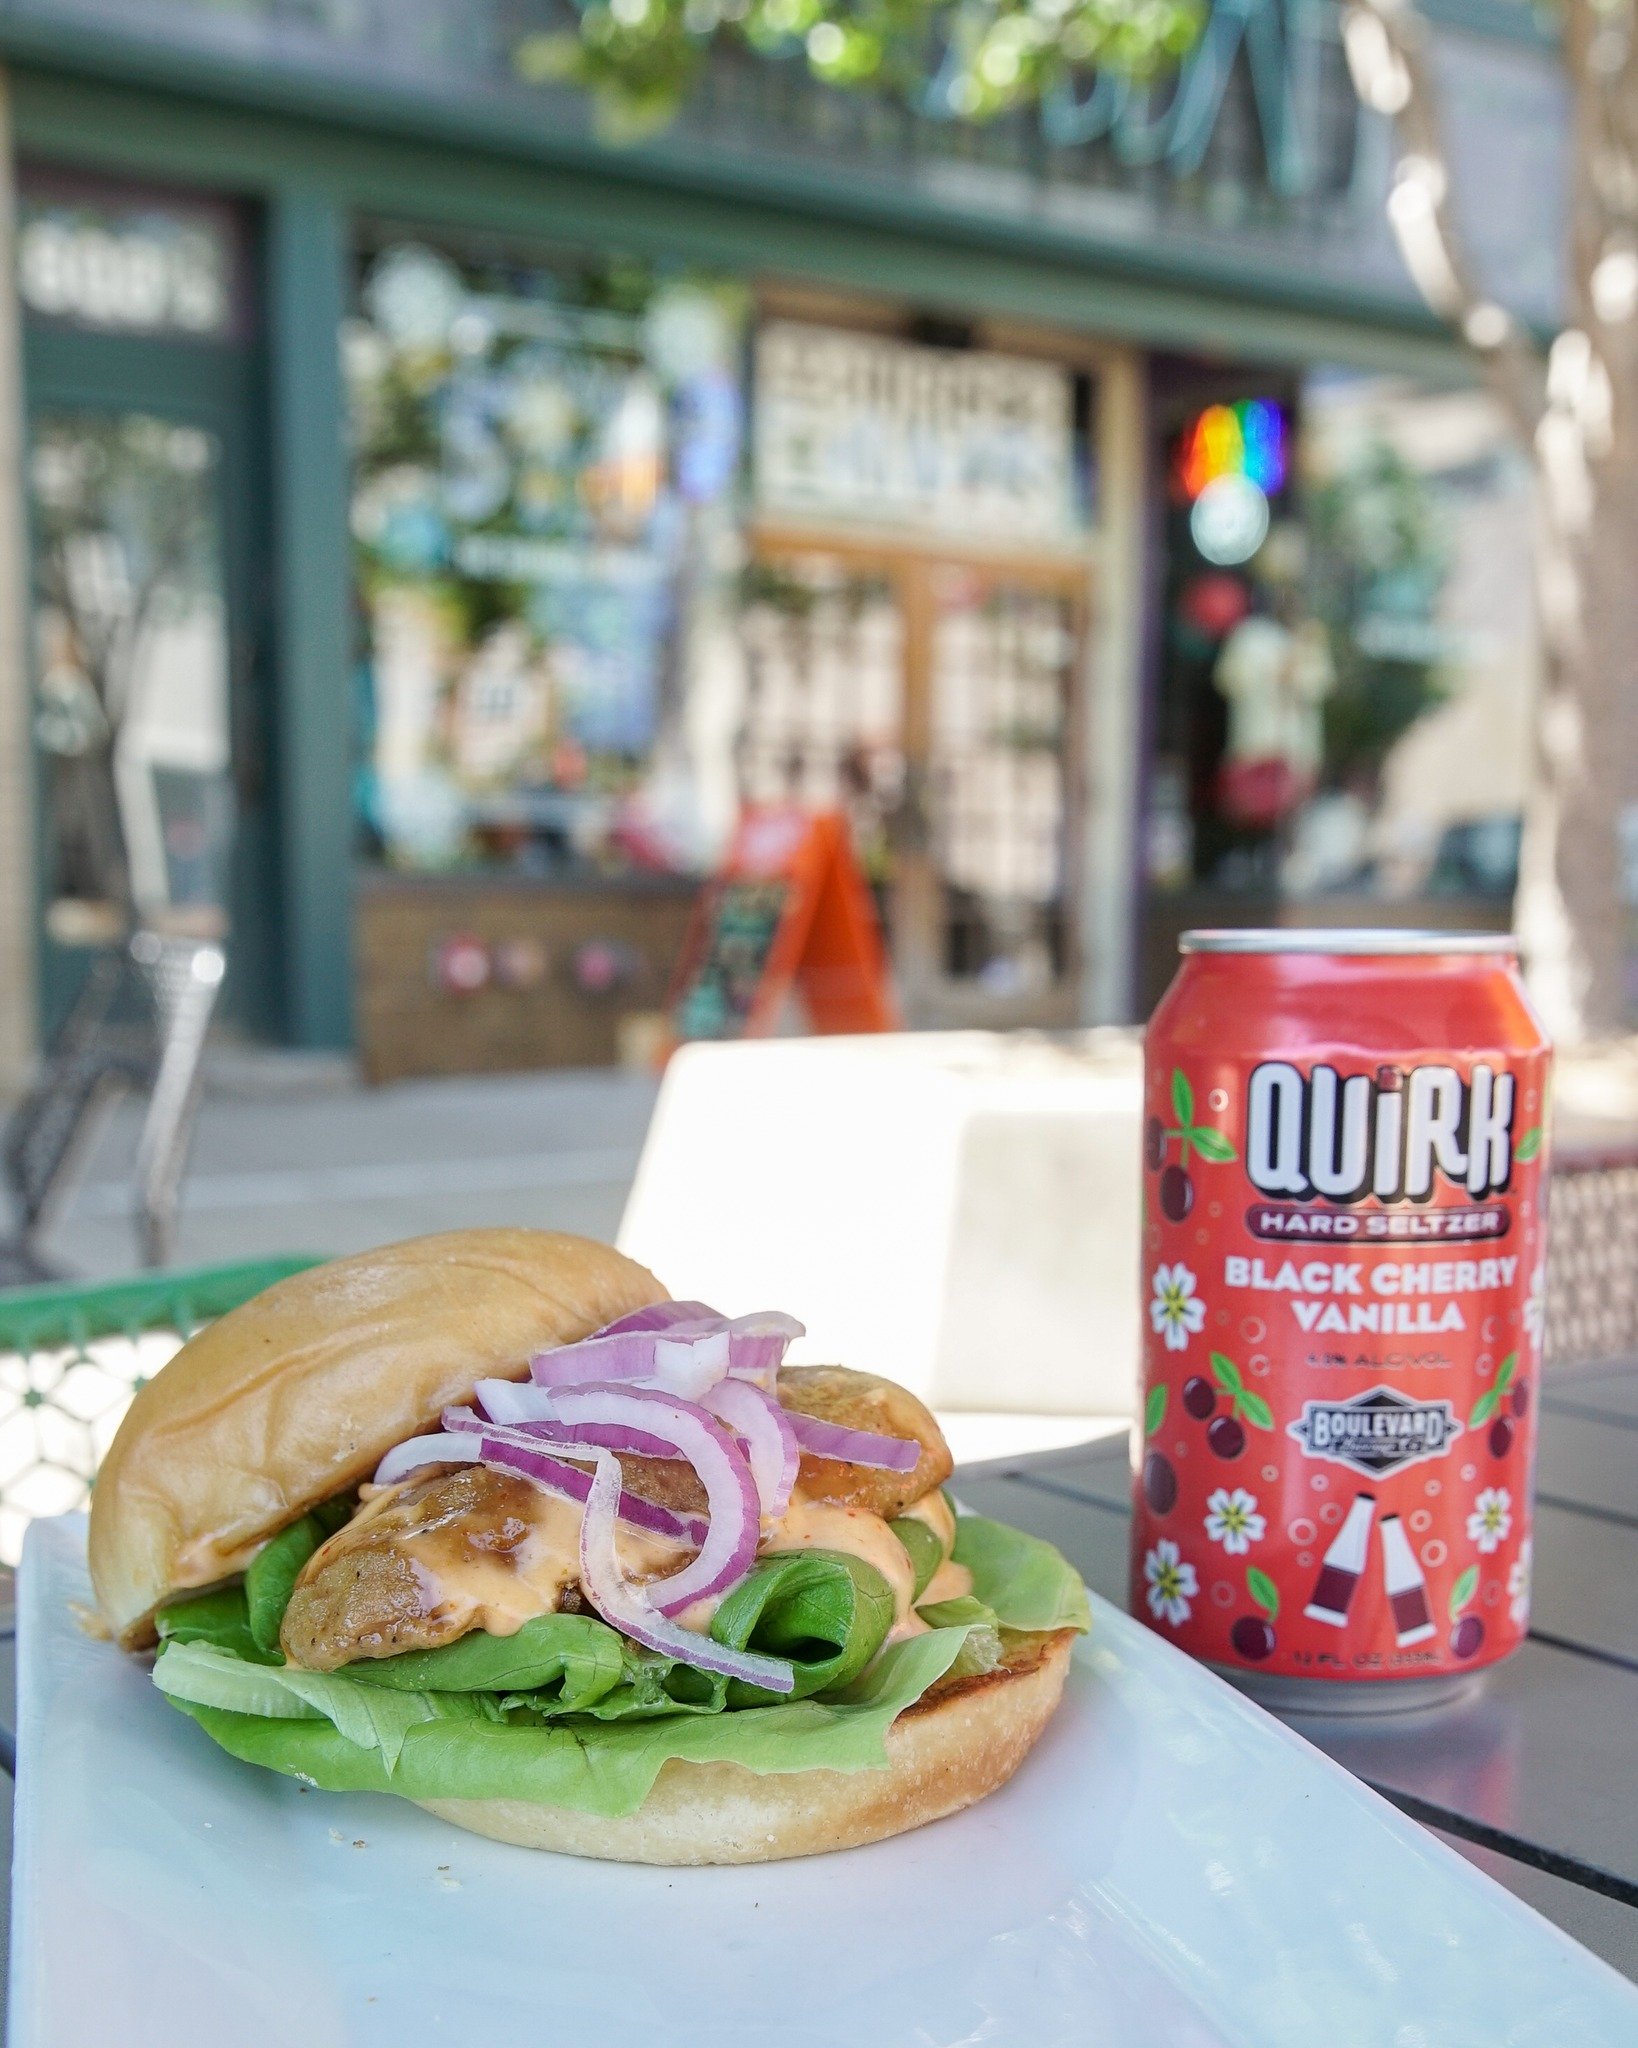 Enjoy lunch or dinner on our patio, no pesky reservation needed.

Featured special - Hot Honey Chicken - $13
Fried chicken, hot honey, sriracha mayo, red onion, butter lettuce.
Is DF, GF w/ GF bun and grilled chicken